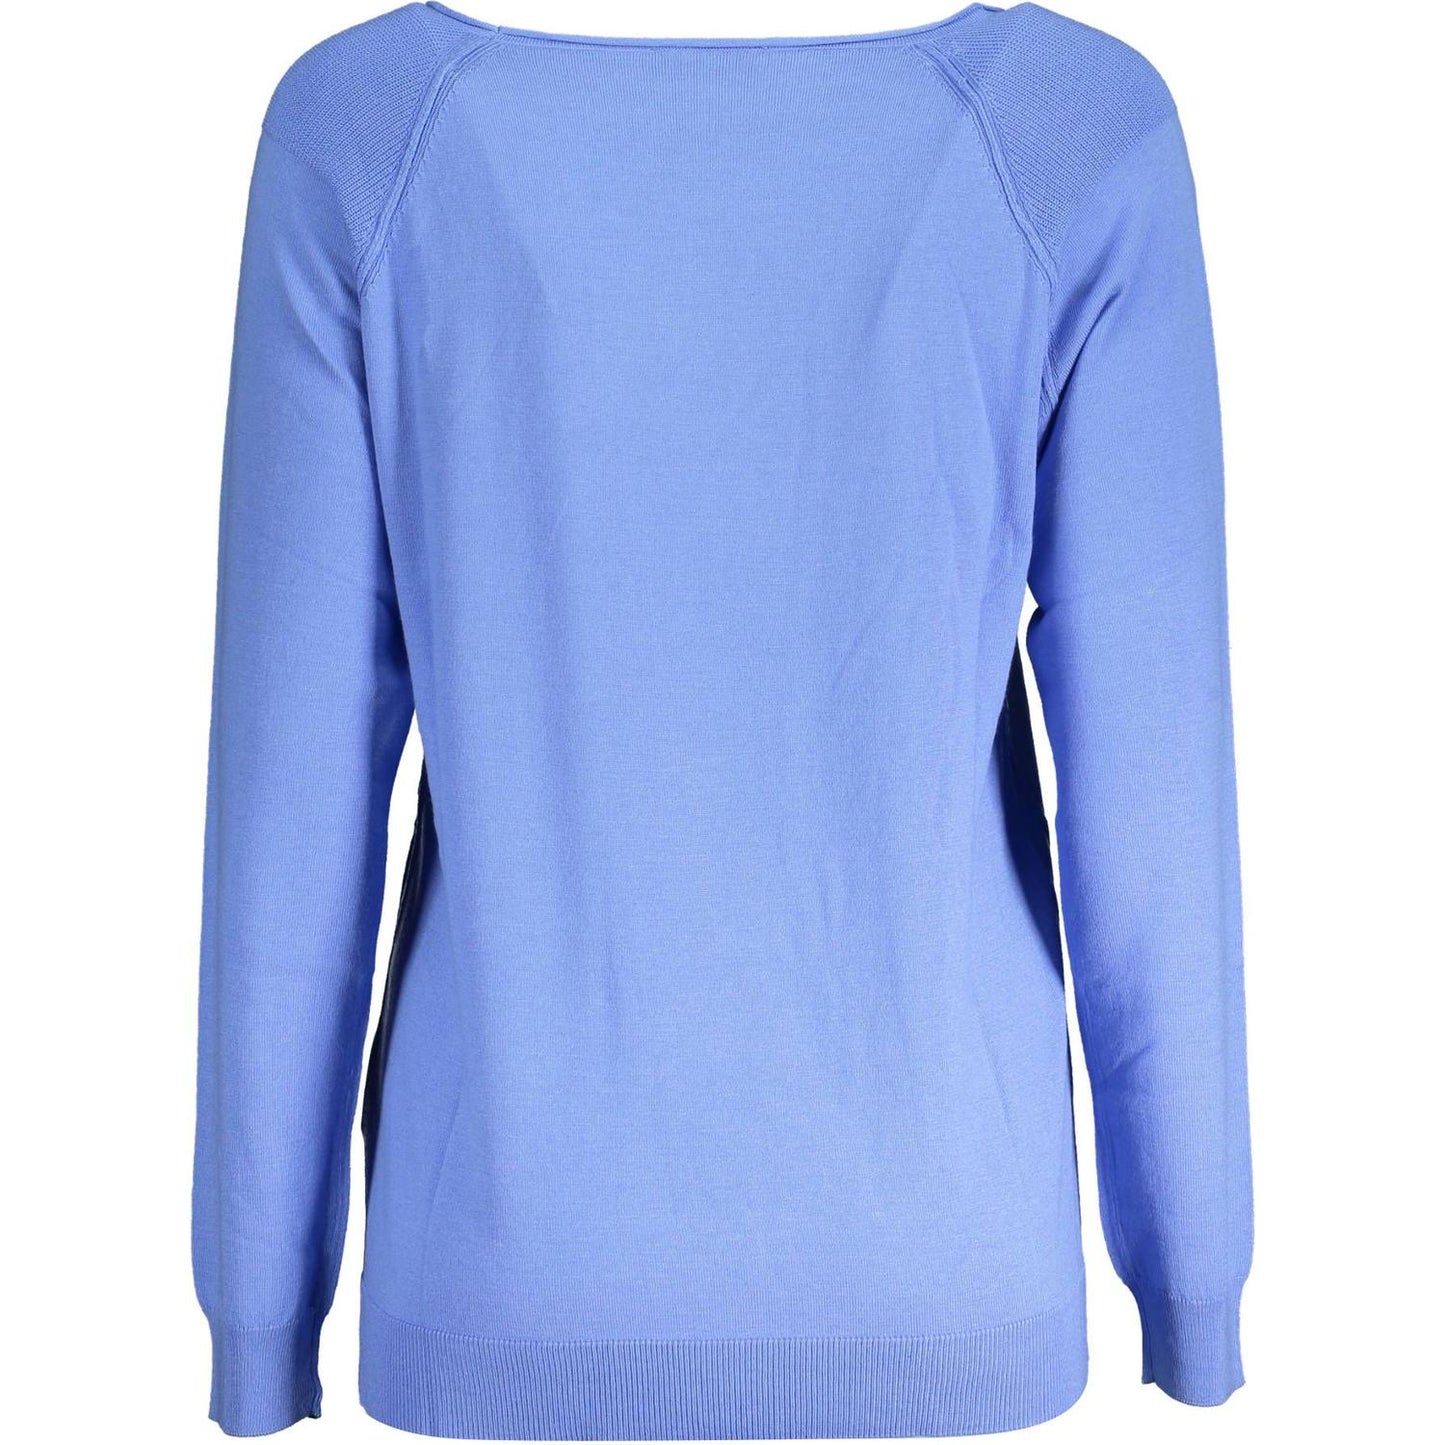 Eco-Chic Light Blue Sweater with Contrasting Accents North Sails